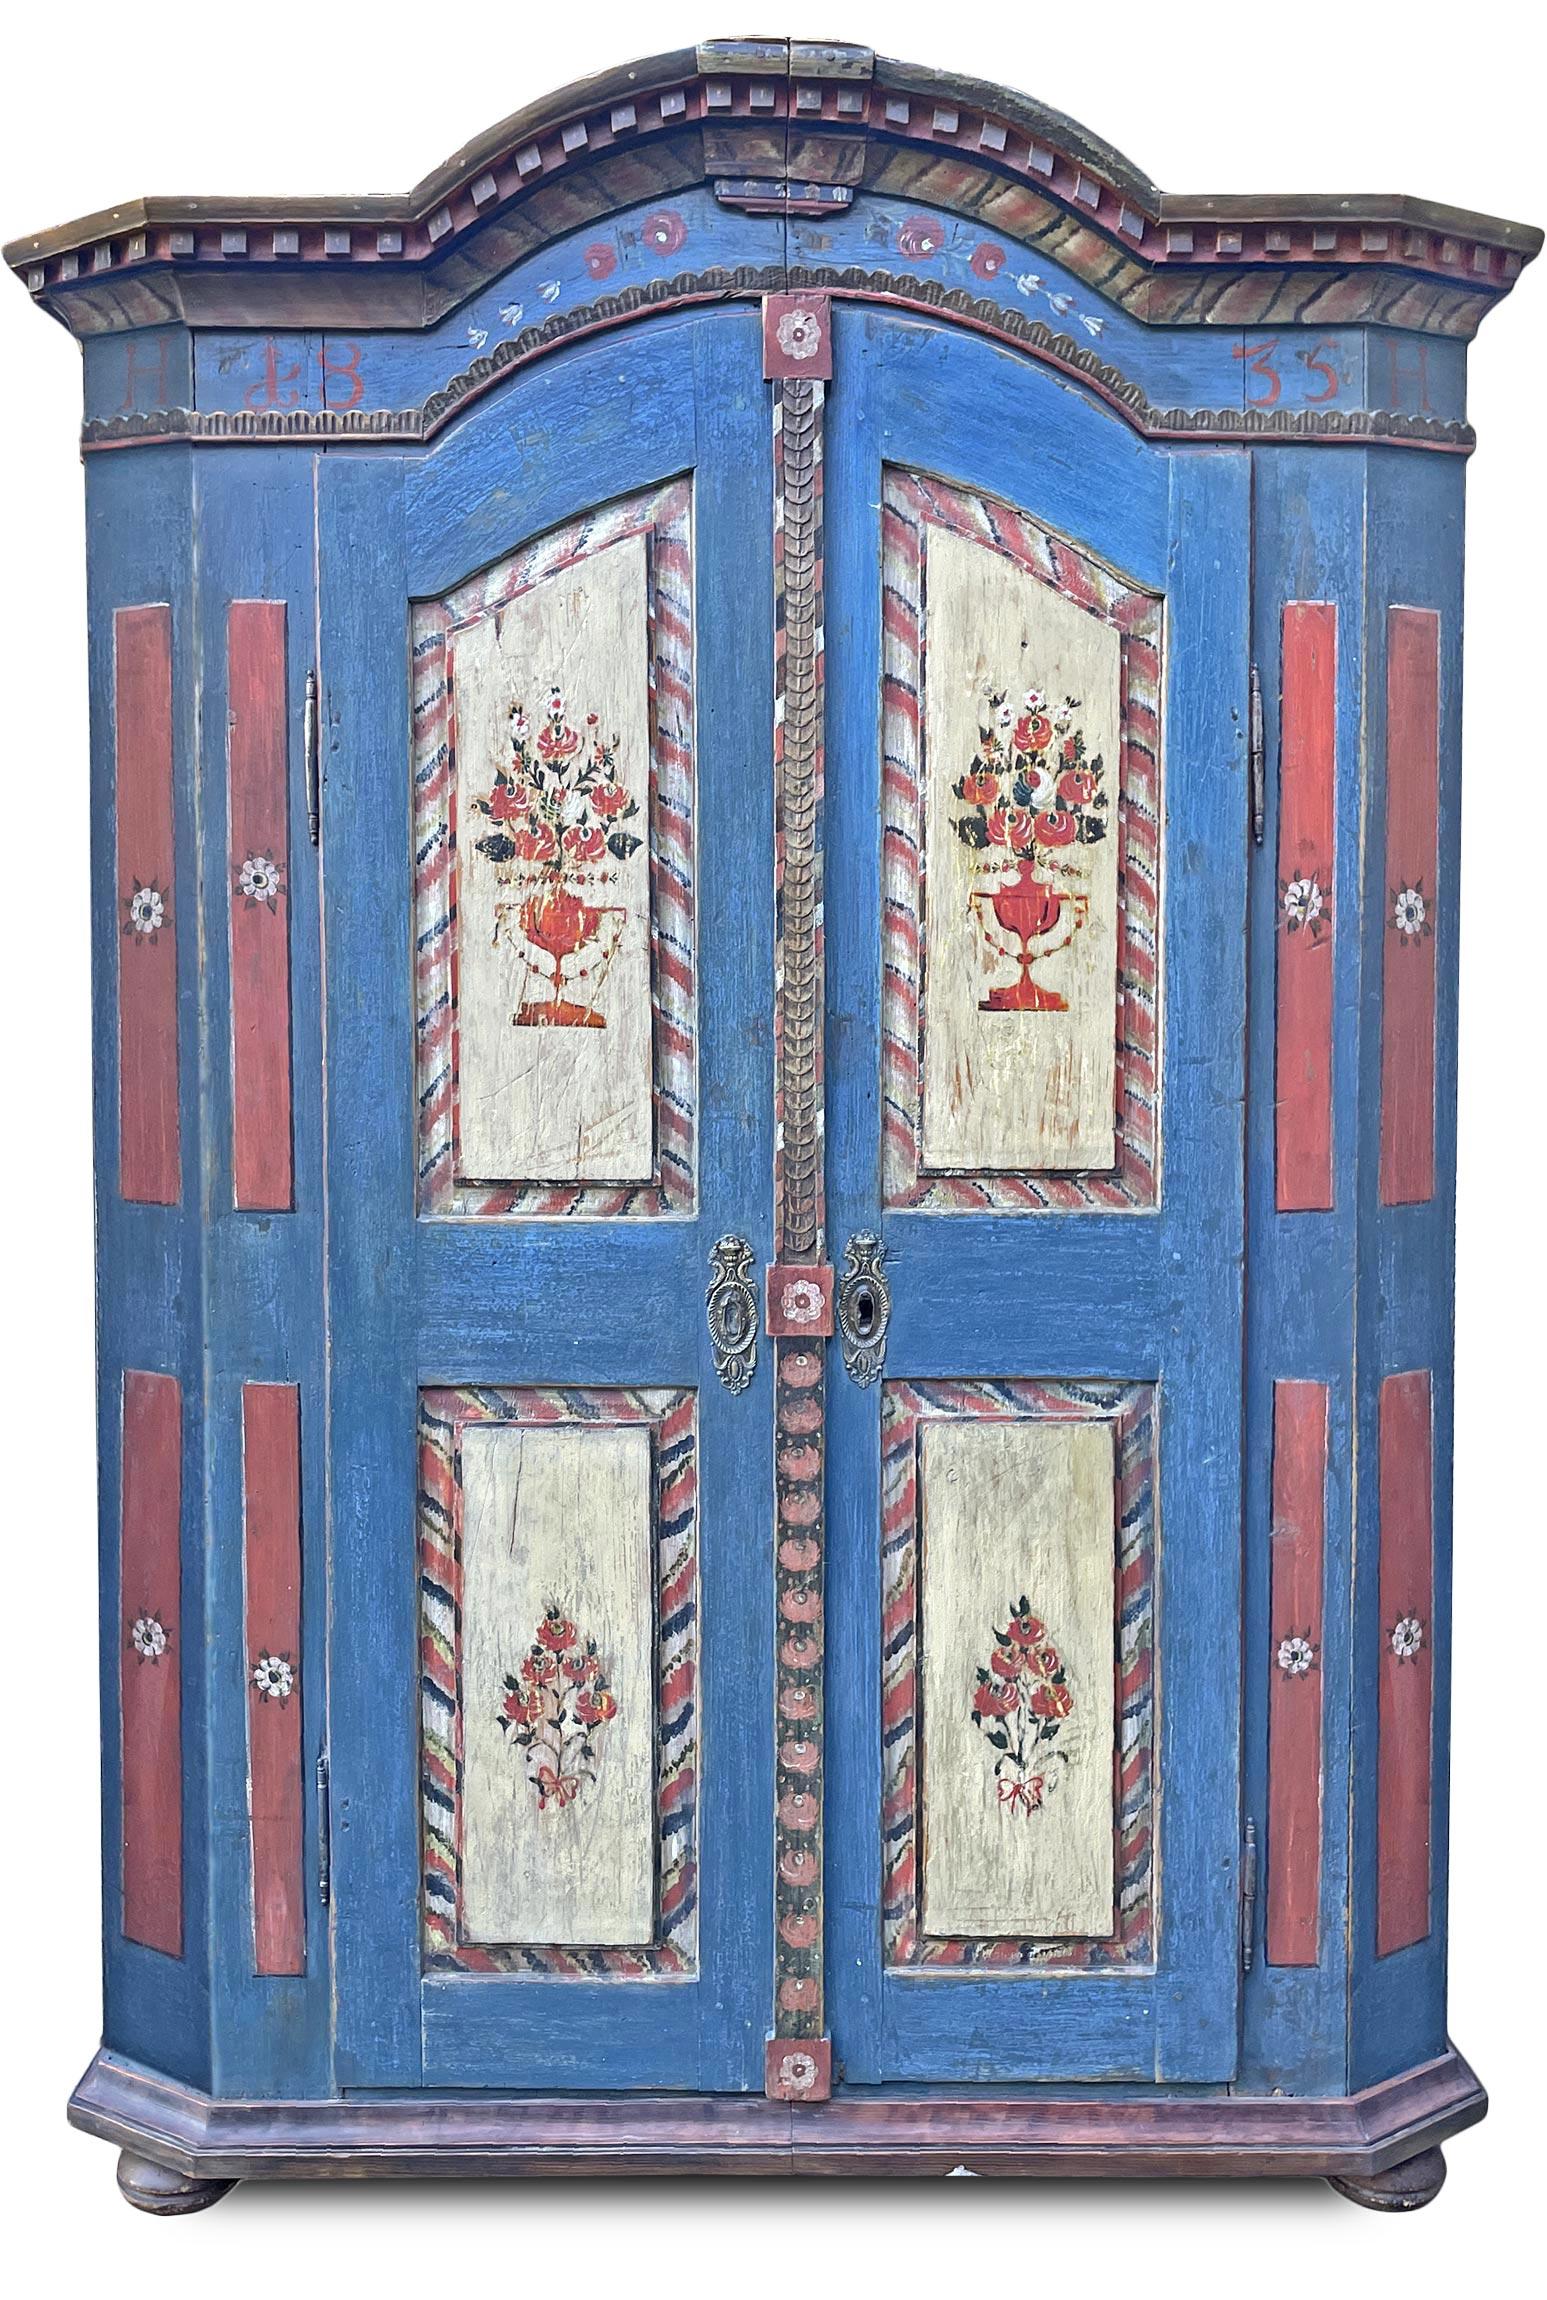 Blue Tyrolean wardrobe dated 1835

H.182 – L.122 (135 at the frames) – P.43 (50 at the frames)

Tyrolean painted cabinet with two doors, painted throughout with a blue background, featuring four framed panels on the doors, with a cream